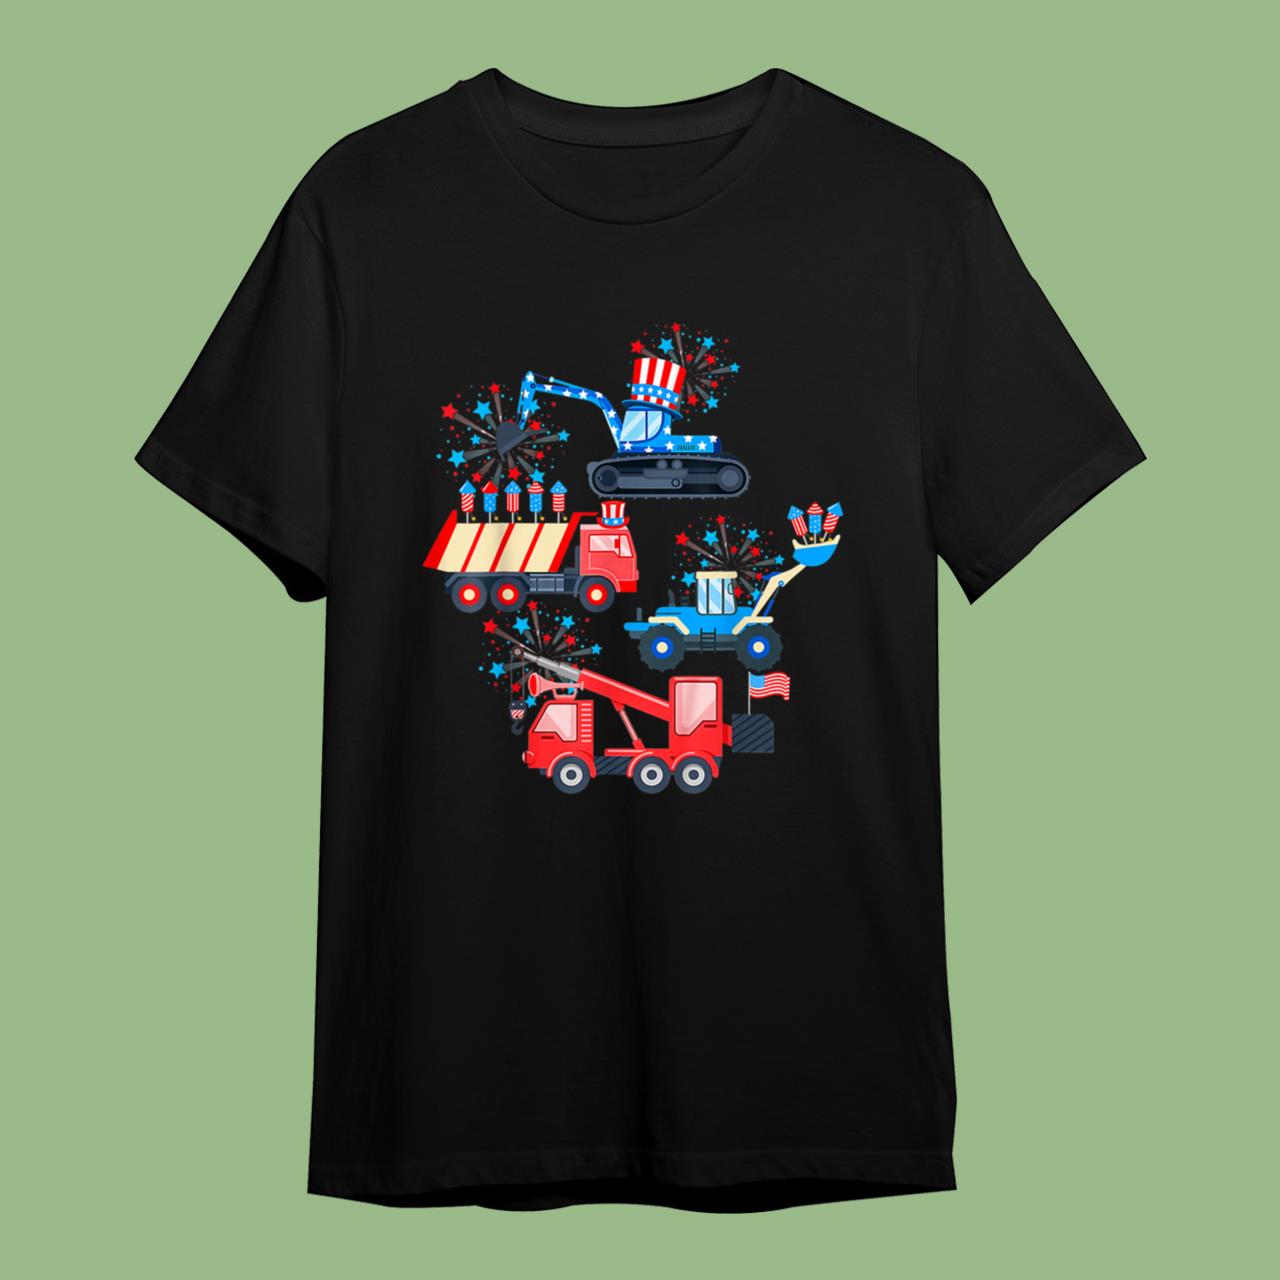 Happy 4th Of July Crane Truck Construction Toddler Kids Boys T-Shirt